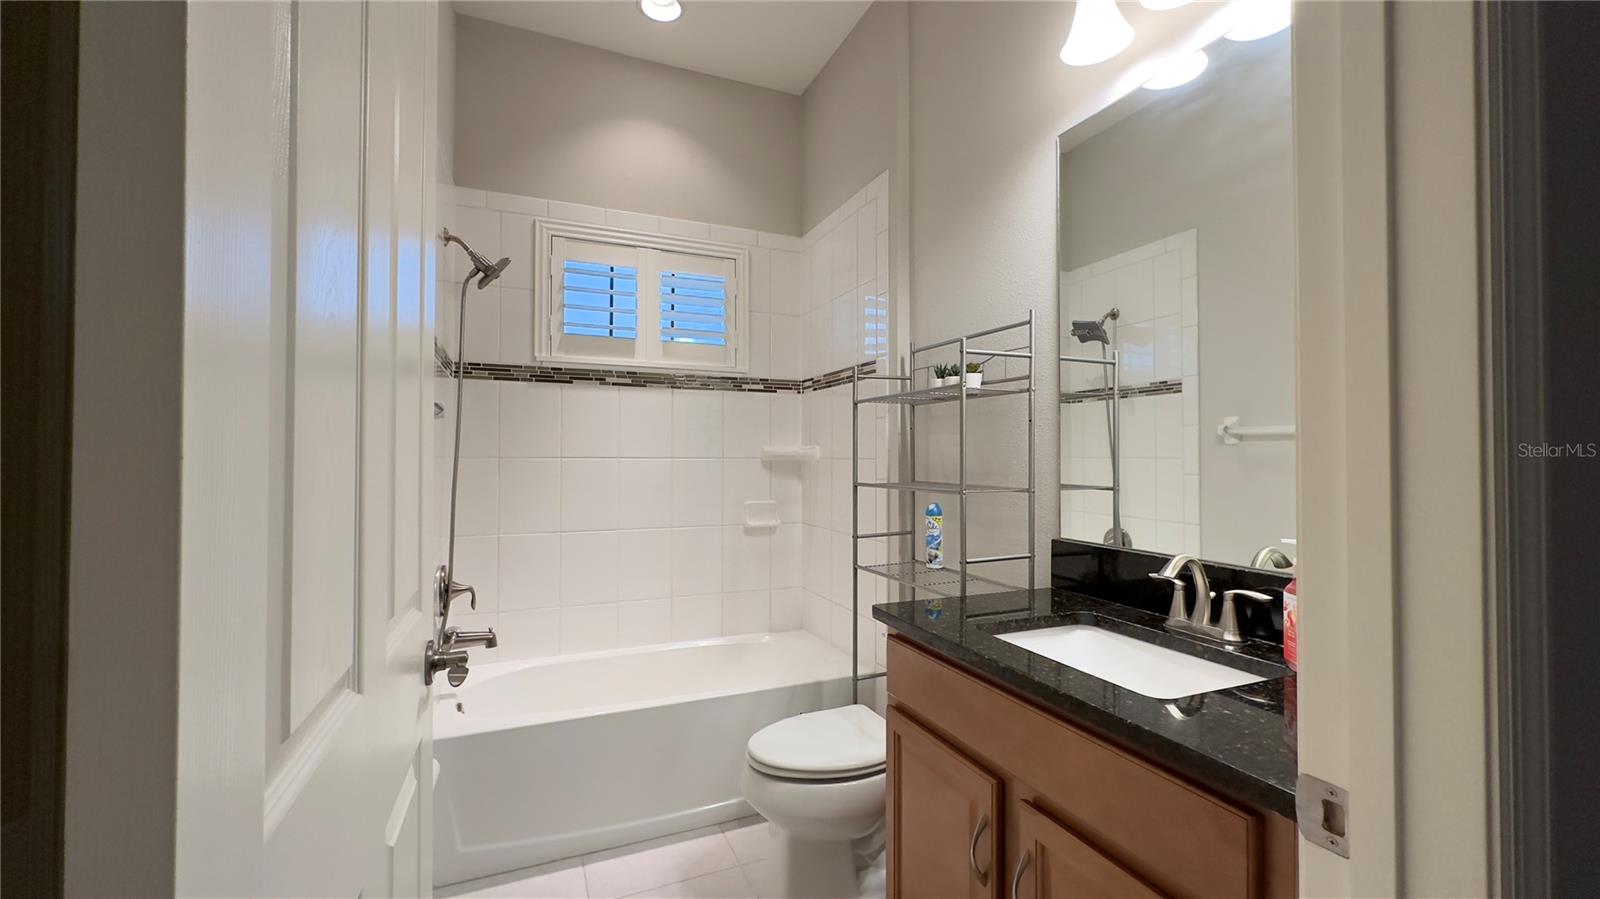 Bathroom #1, adjacent to Bedroom #1, is a full bath with tub/shower combo